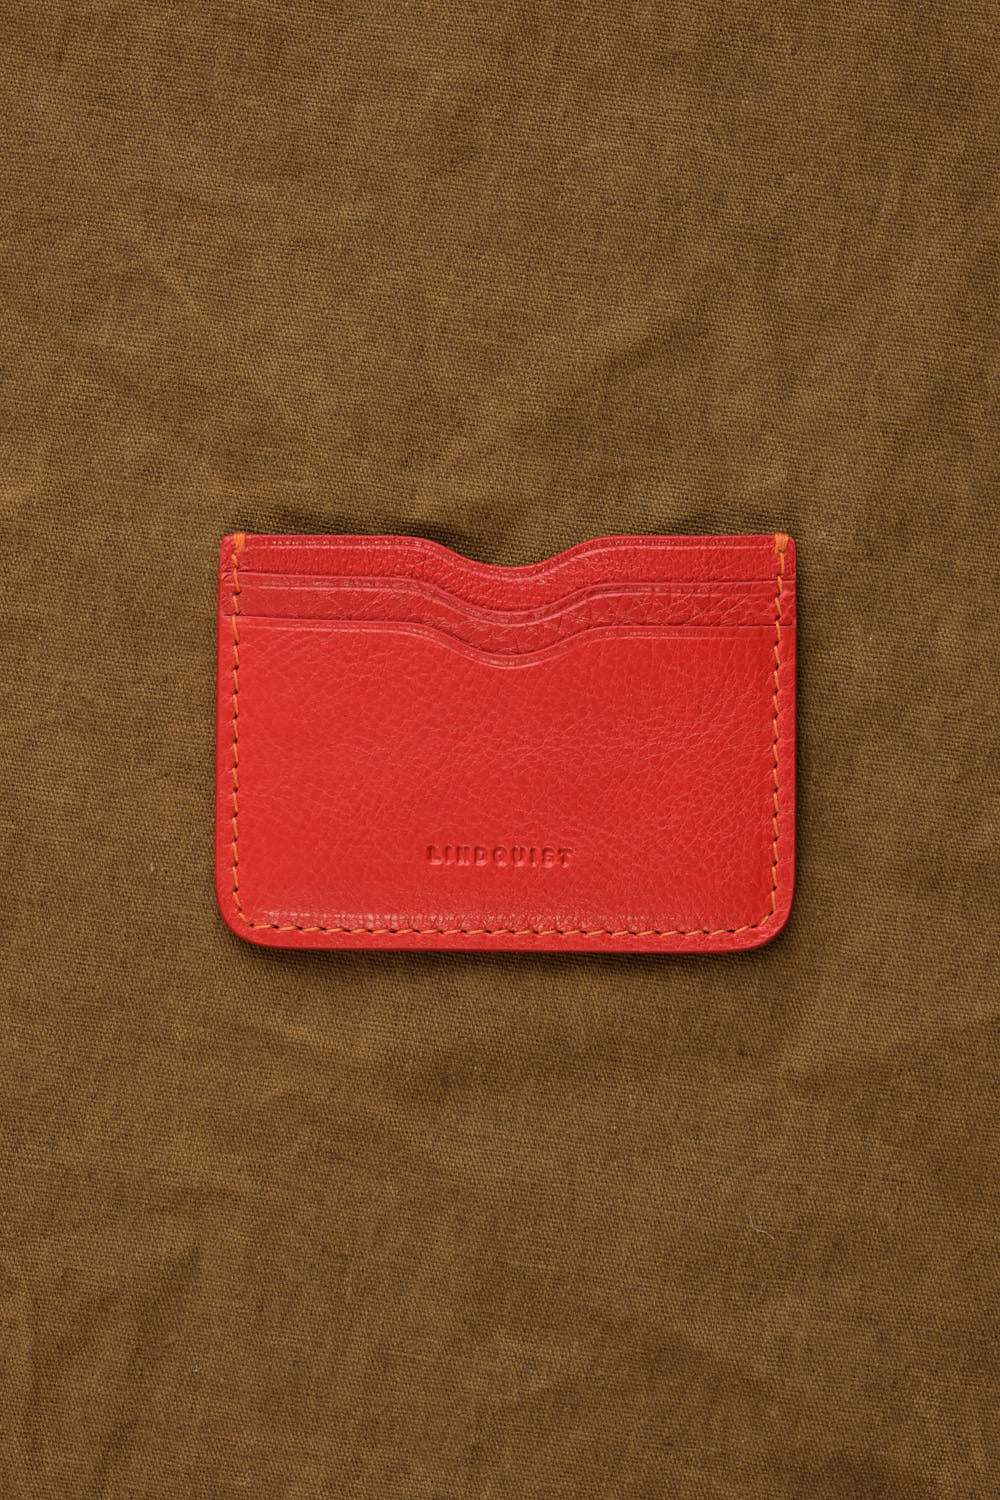 Akira Wallet in Persimmon on table